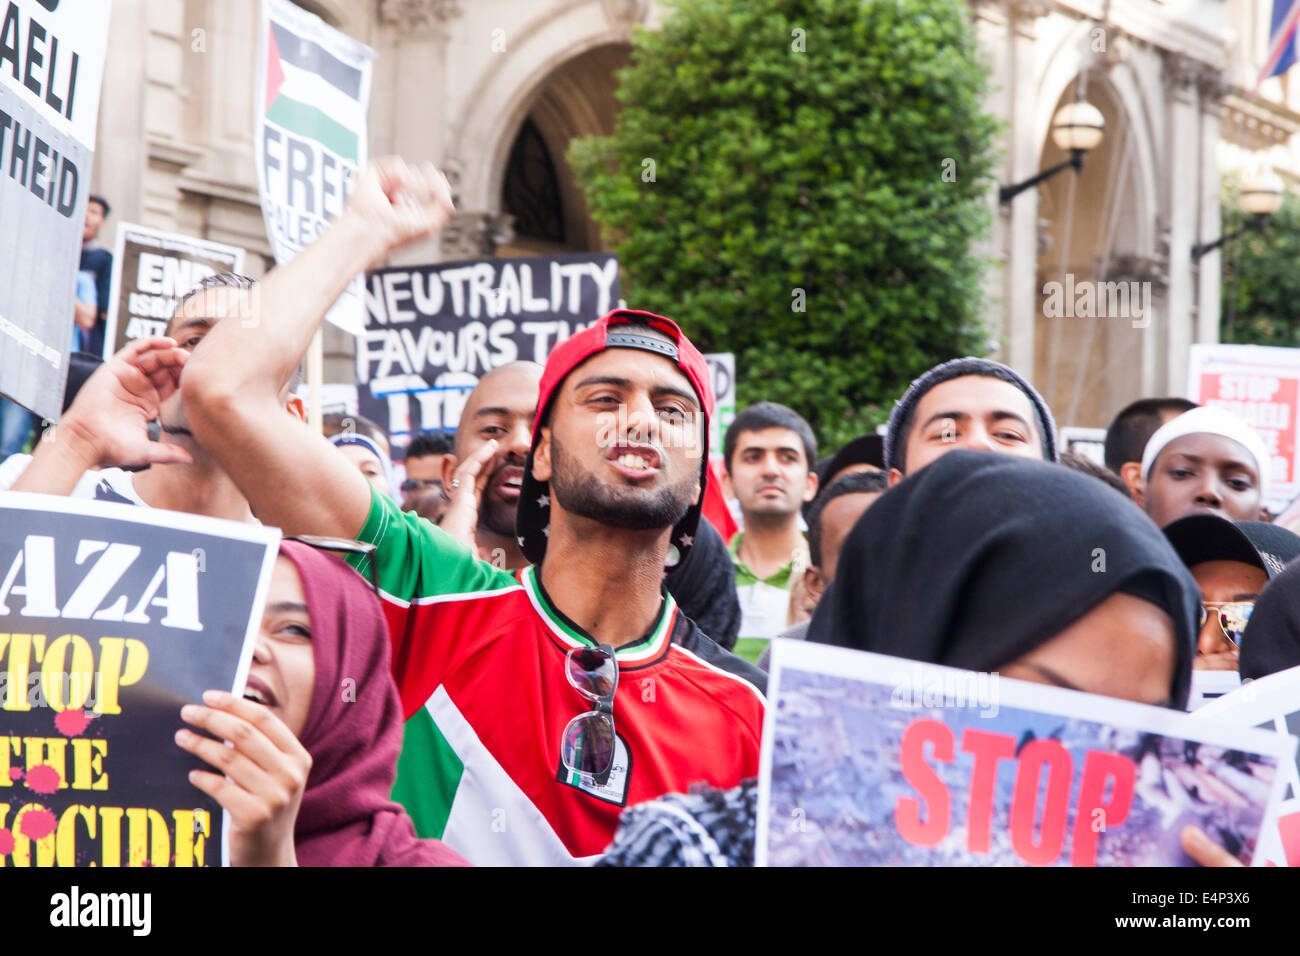 London, UK. 15th July, 2014. Palestinians and their supporters demonstrate outside the BBC's headquarters against an alleged pro-Israeli bias in their coverage of Palestinian affairs. Credit:  Paul Davey/Alamy Live News Stock Photo